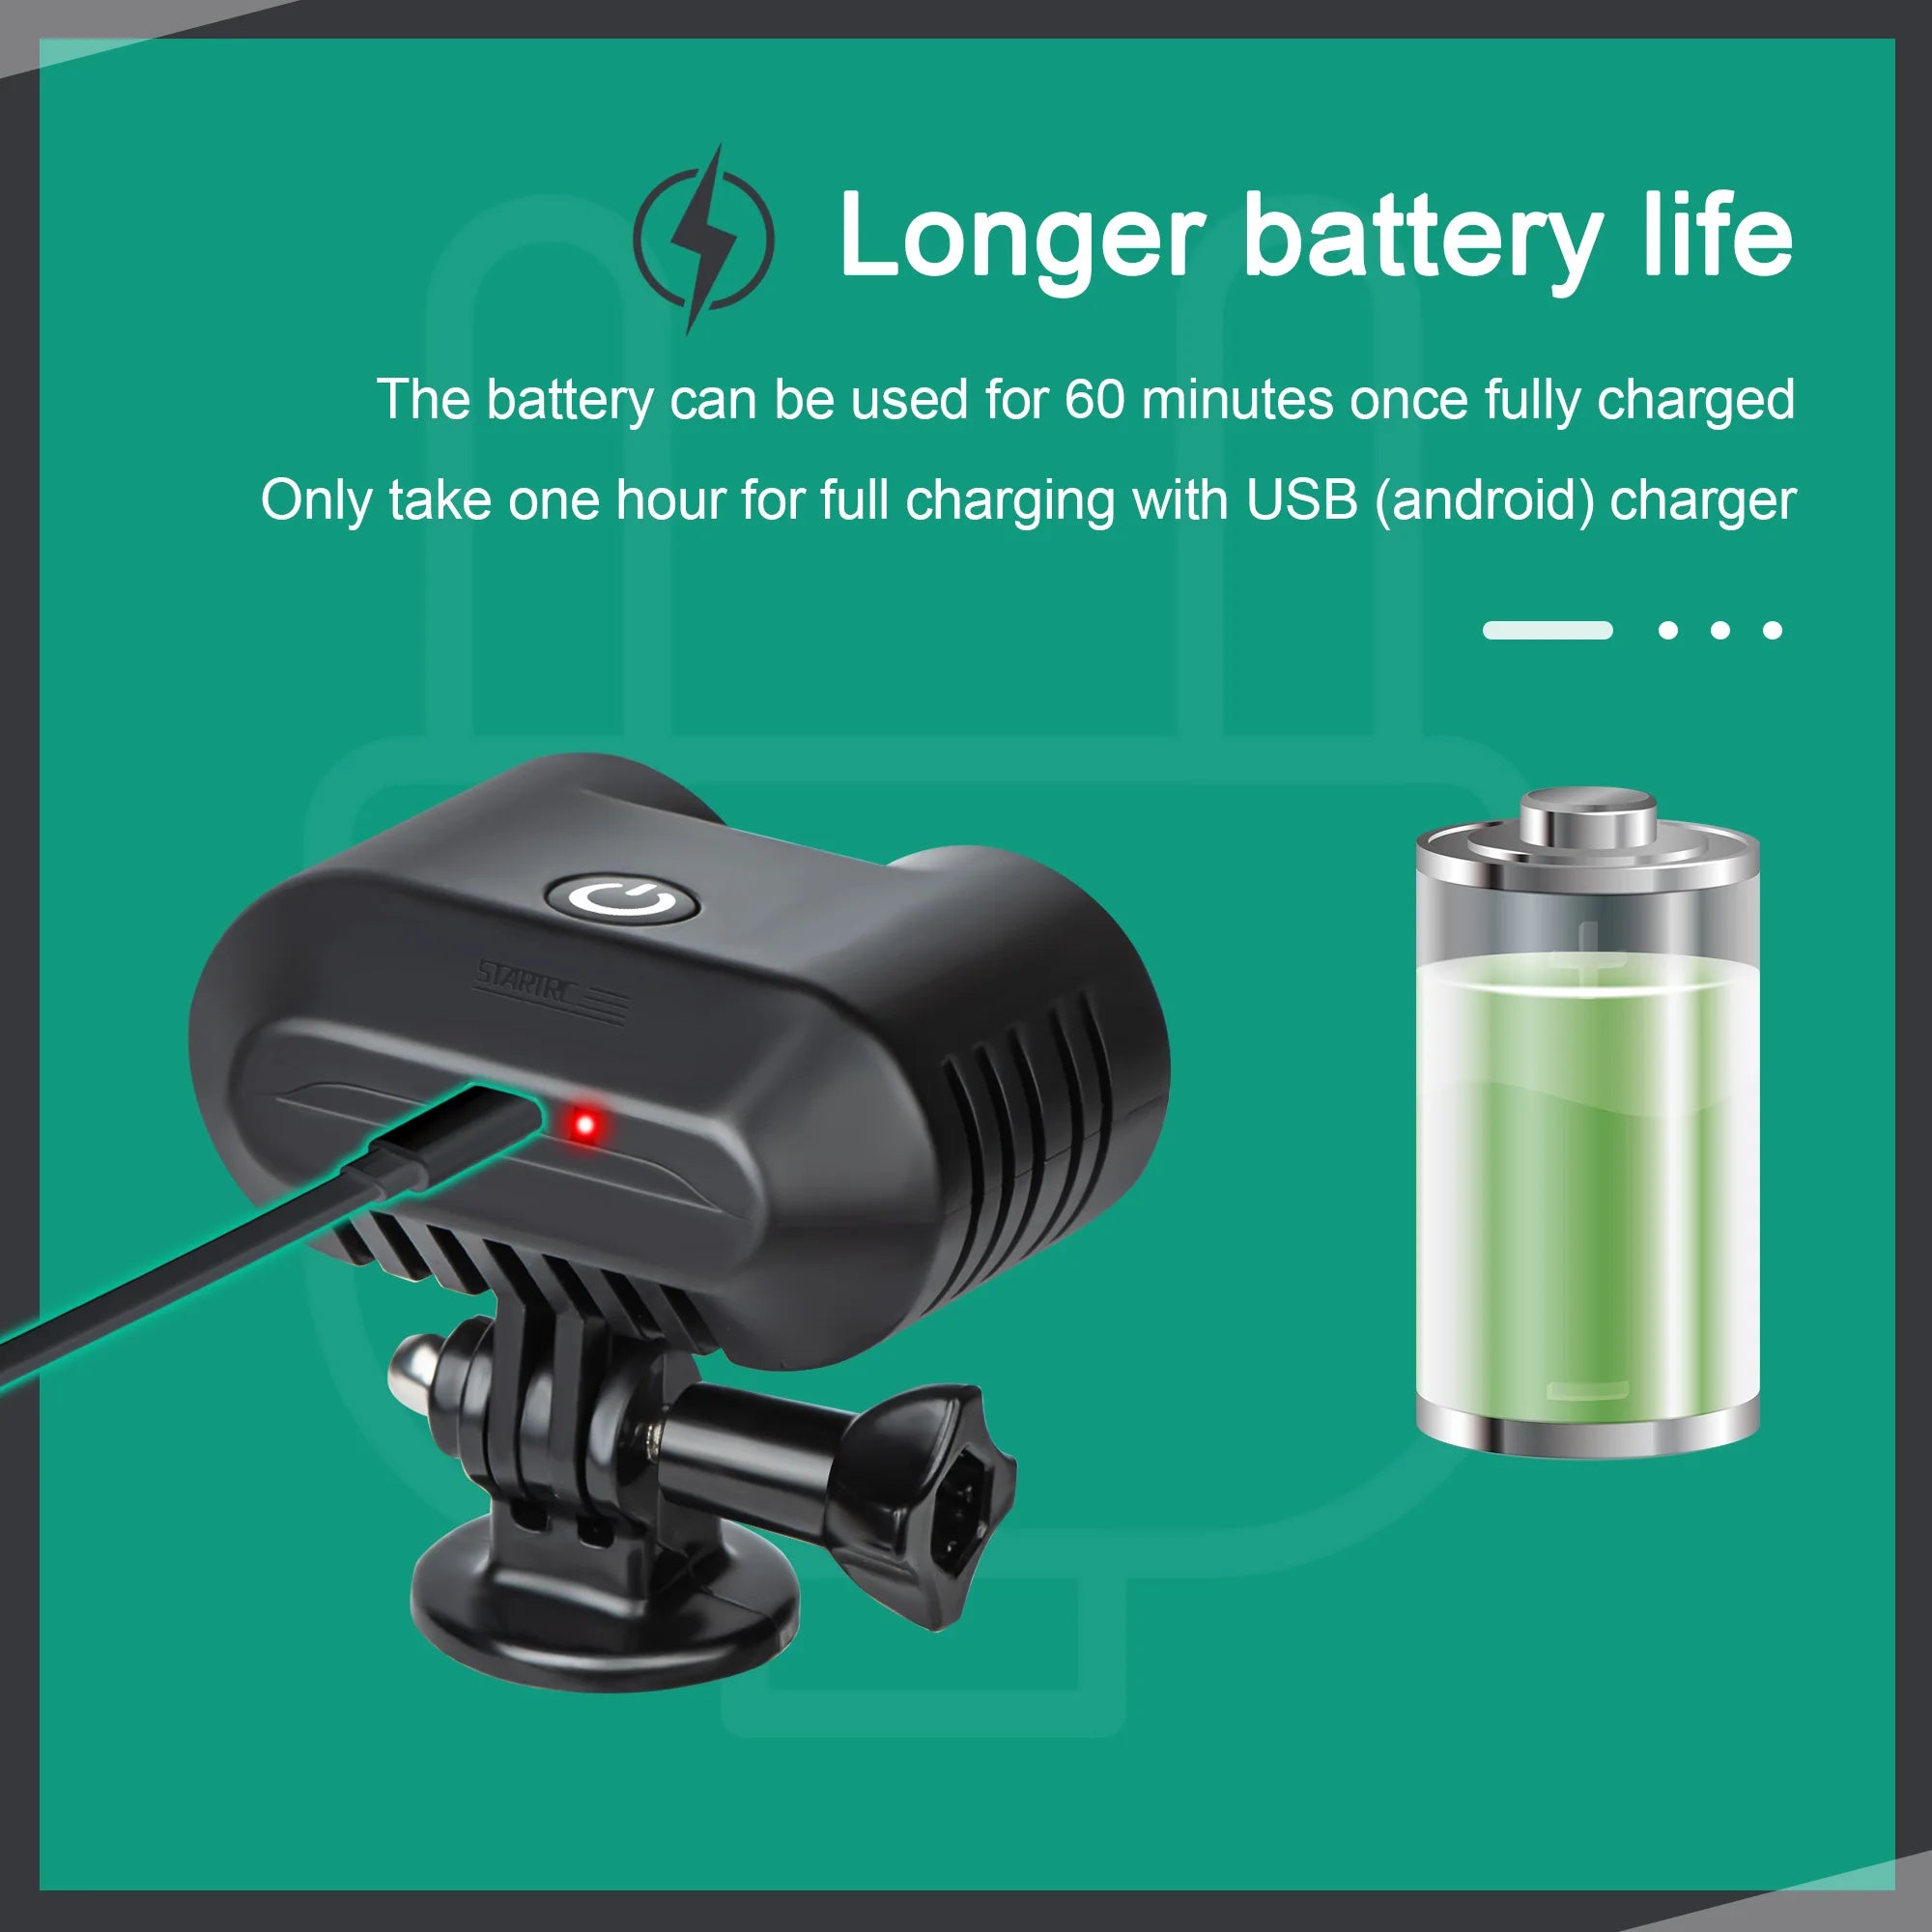 Search Light For DJI Avata, Longer battery life The battery can be used for 60 minutes once fully charged Only take one hour